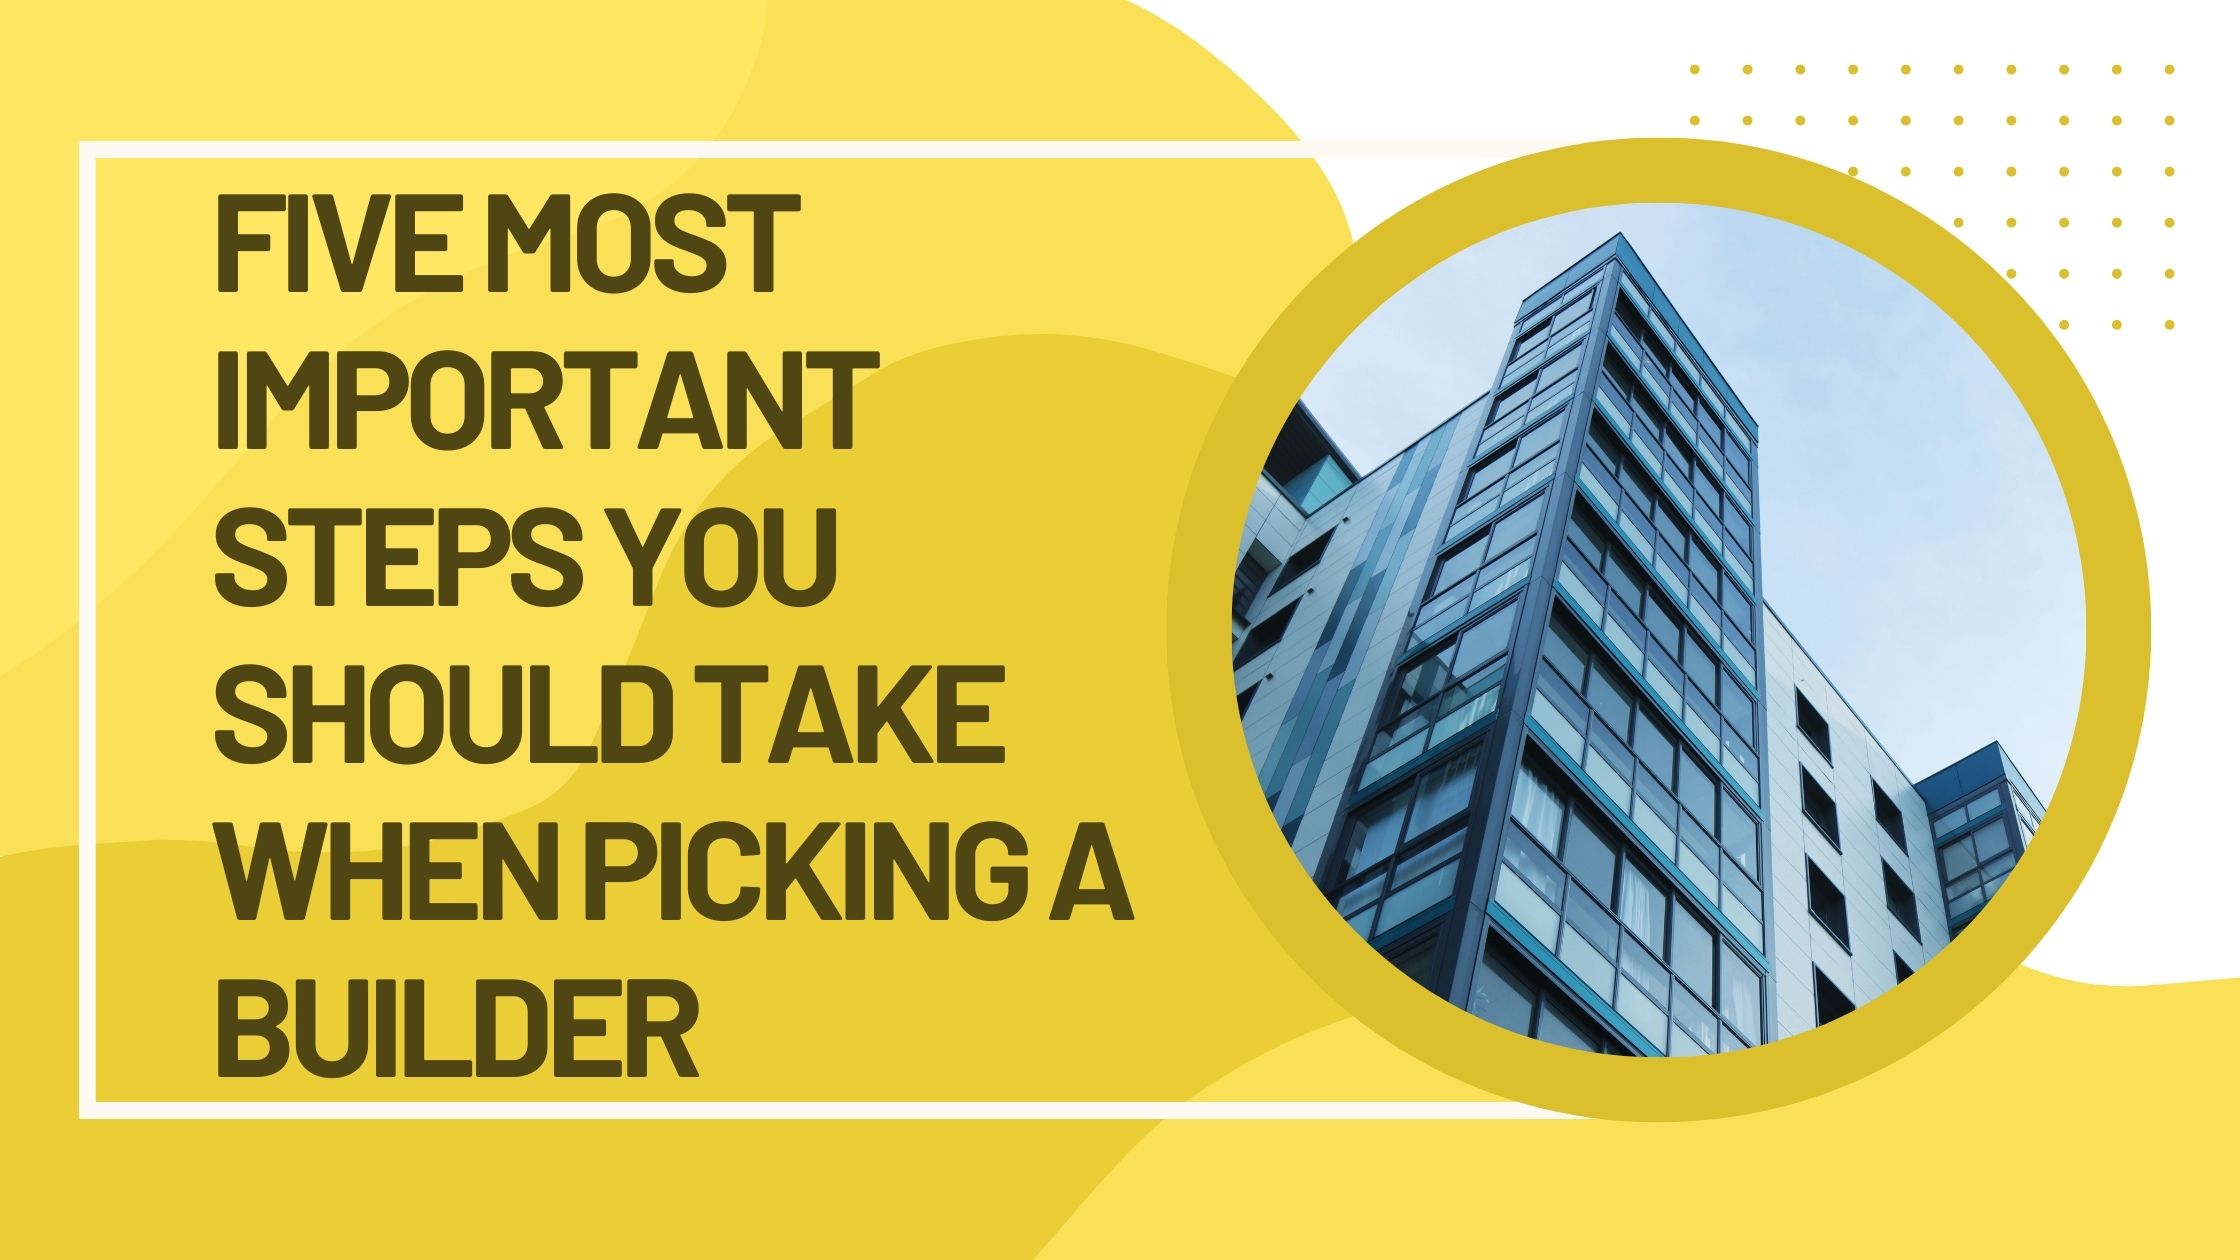 Five Most Important Steps You Should Take When Picking A Builder